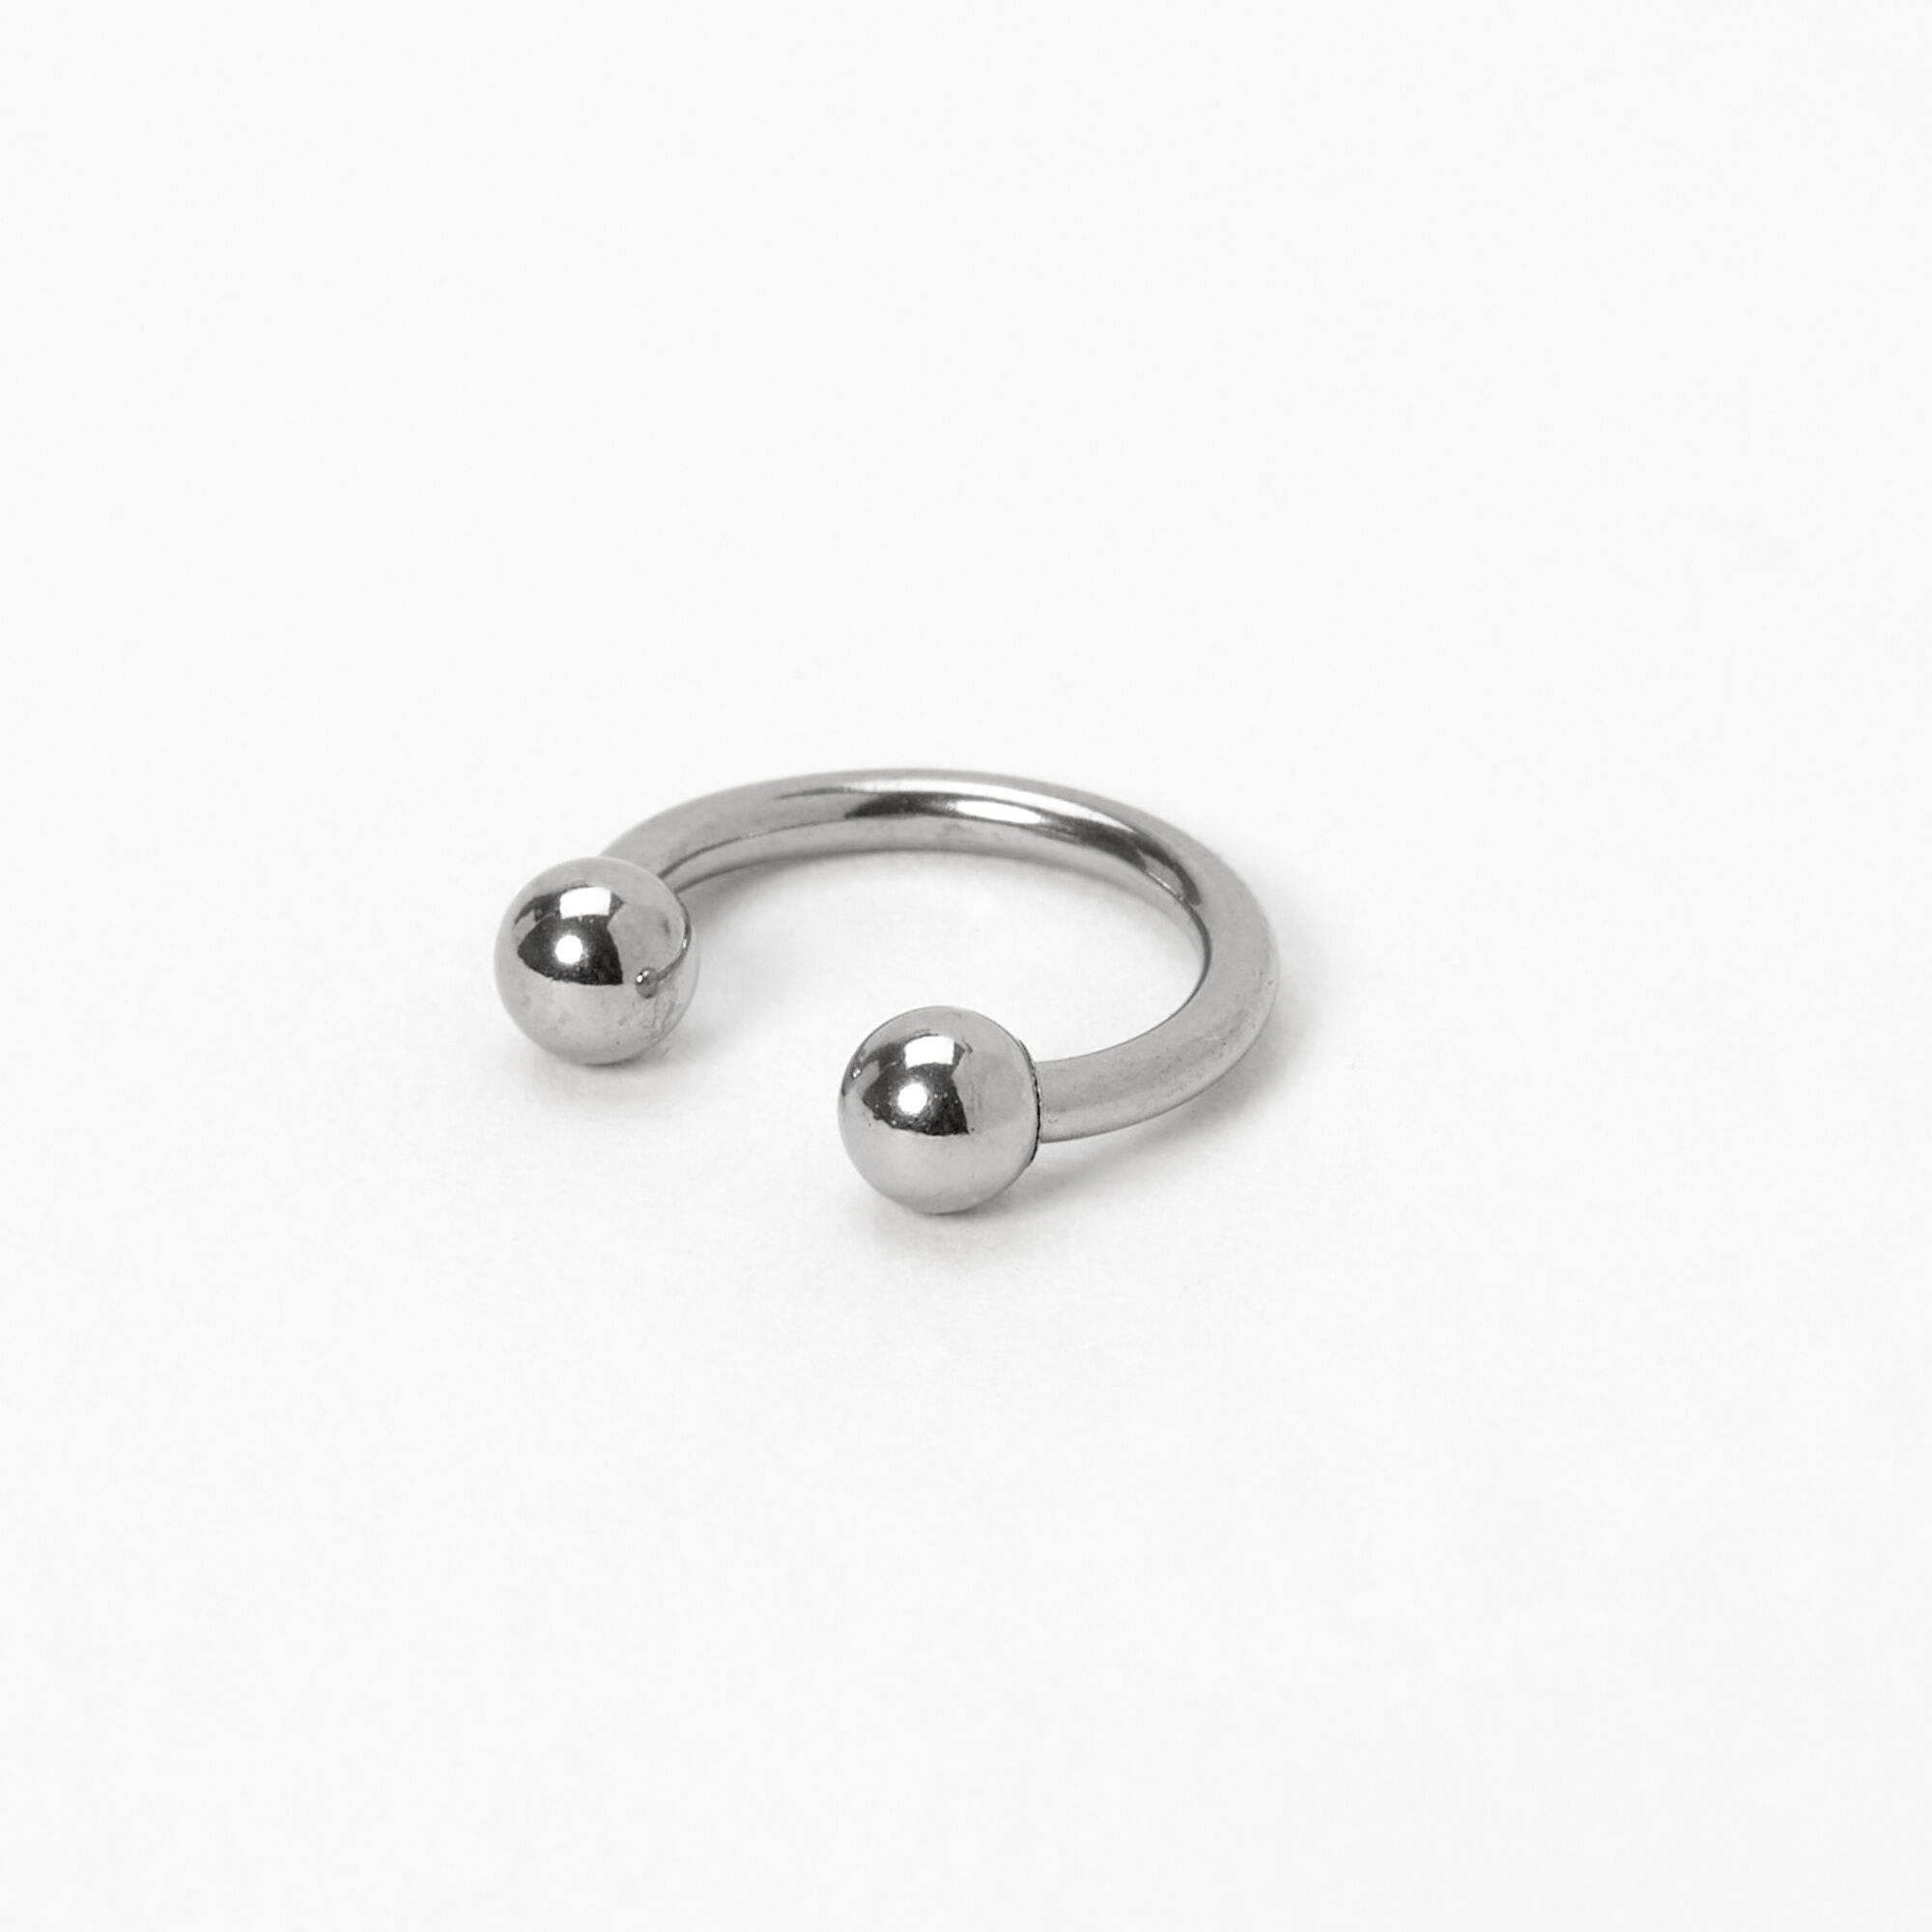 SET OF TWO SEPTUM PIERCING PRESS SILVER-TONED NOSE